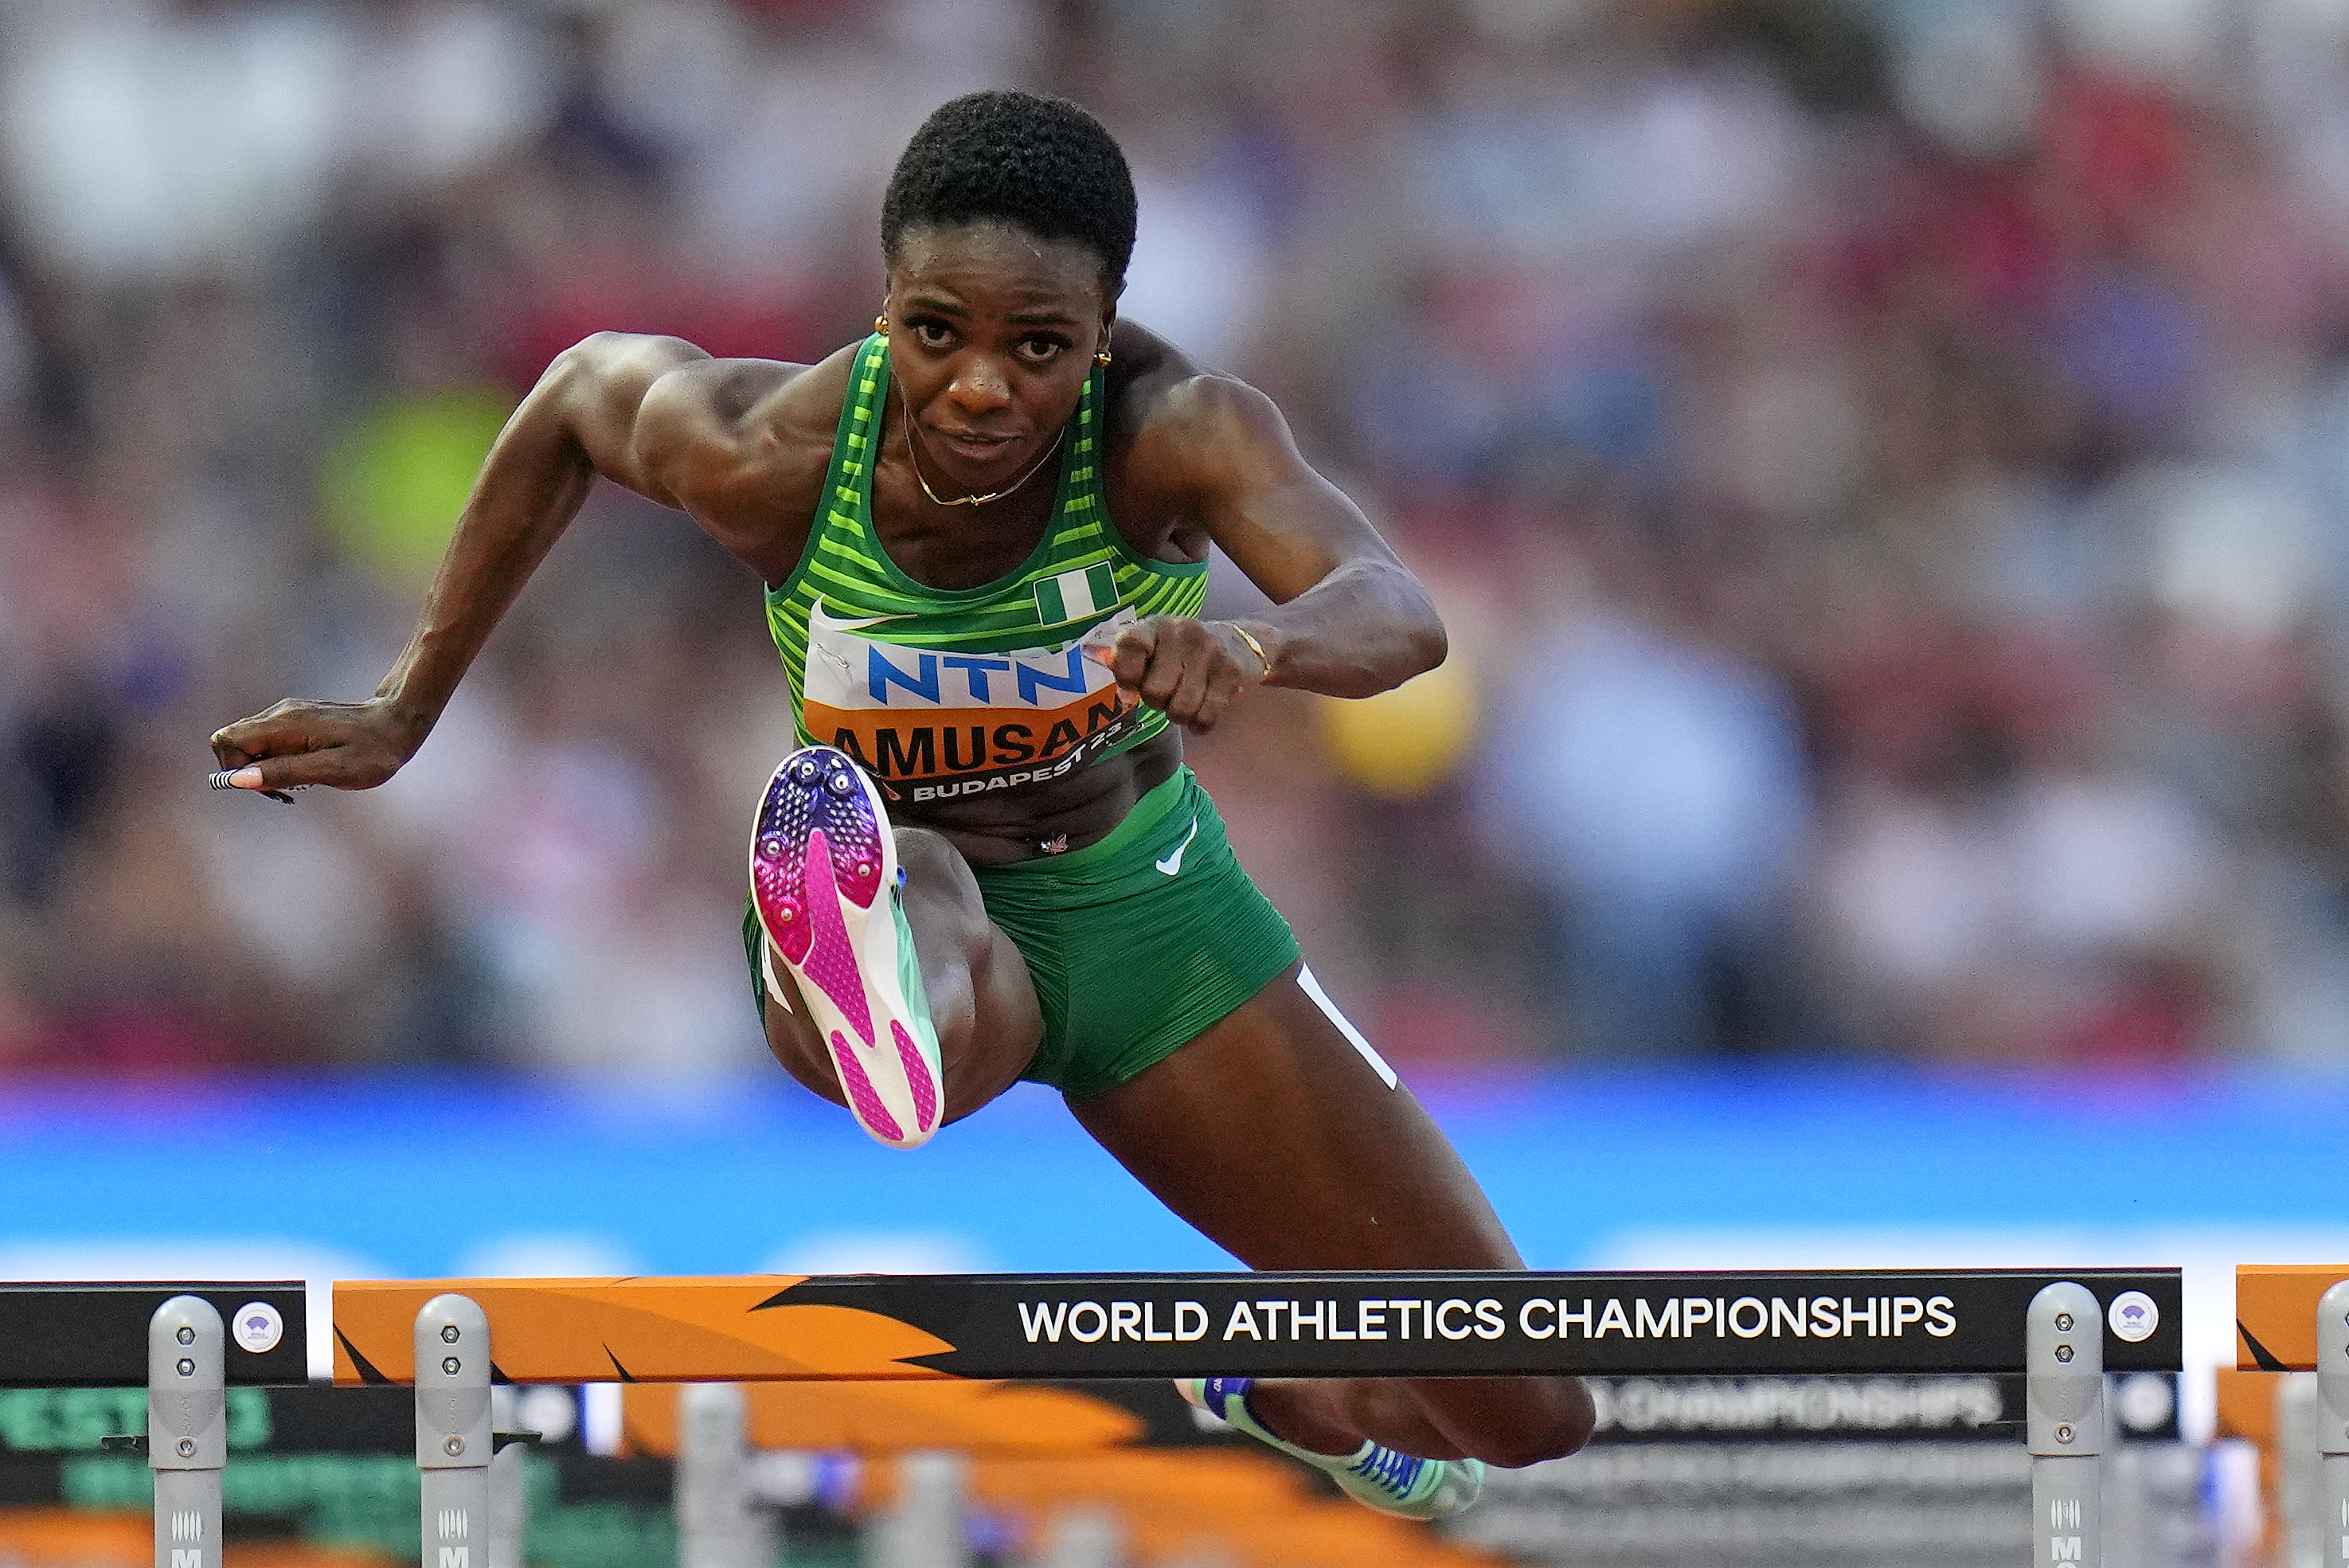 World-record hurdler Amusan never had doubt she'd be at worlds to defend  title